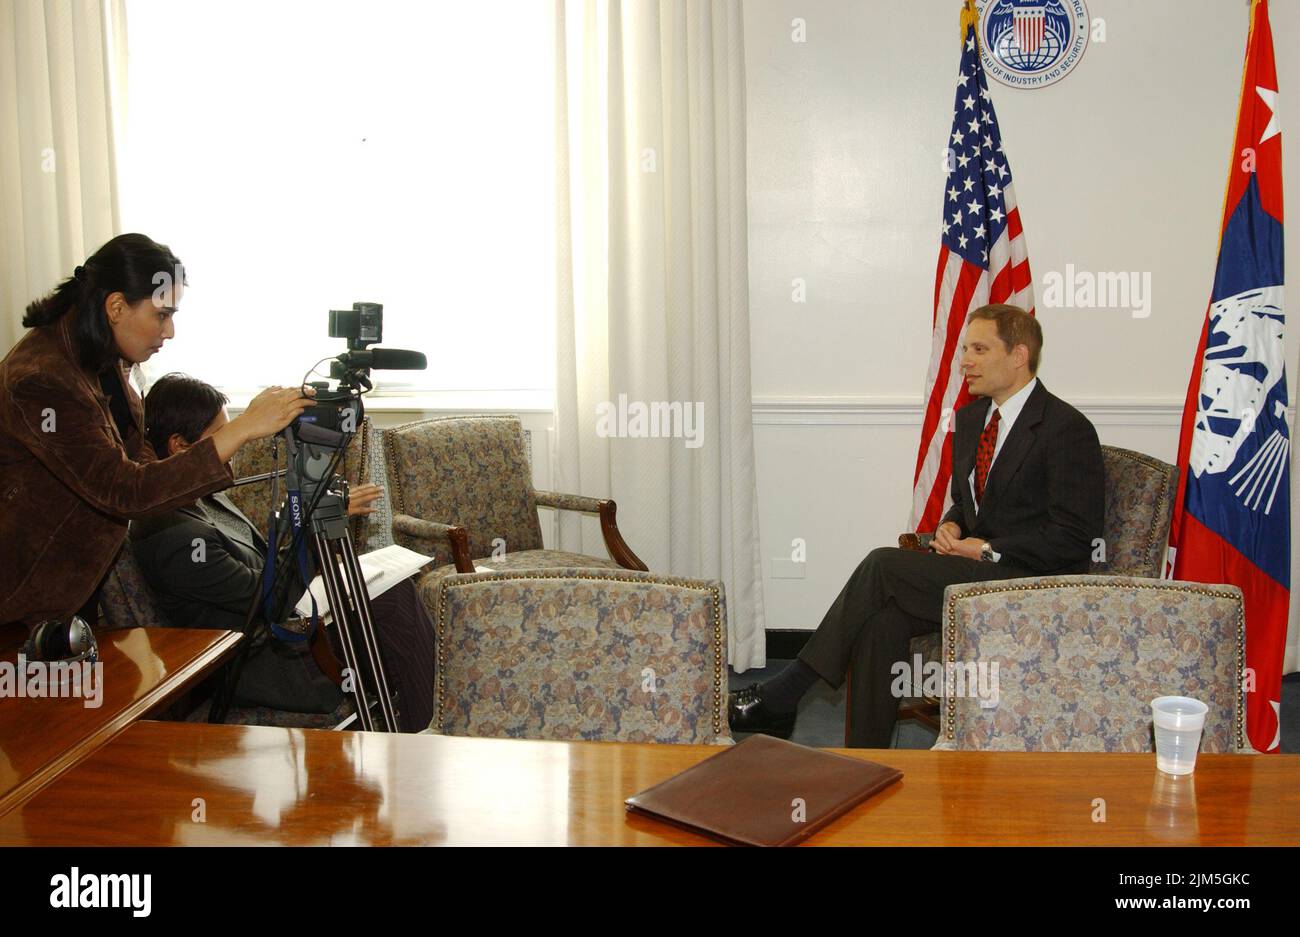 Bureau of Industry and Security - Candid Photos of Peter Lichtenbaum Before Press Interview Stock Photo